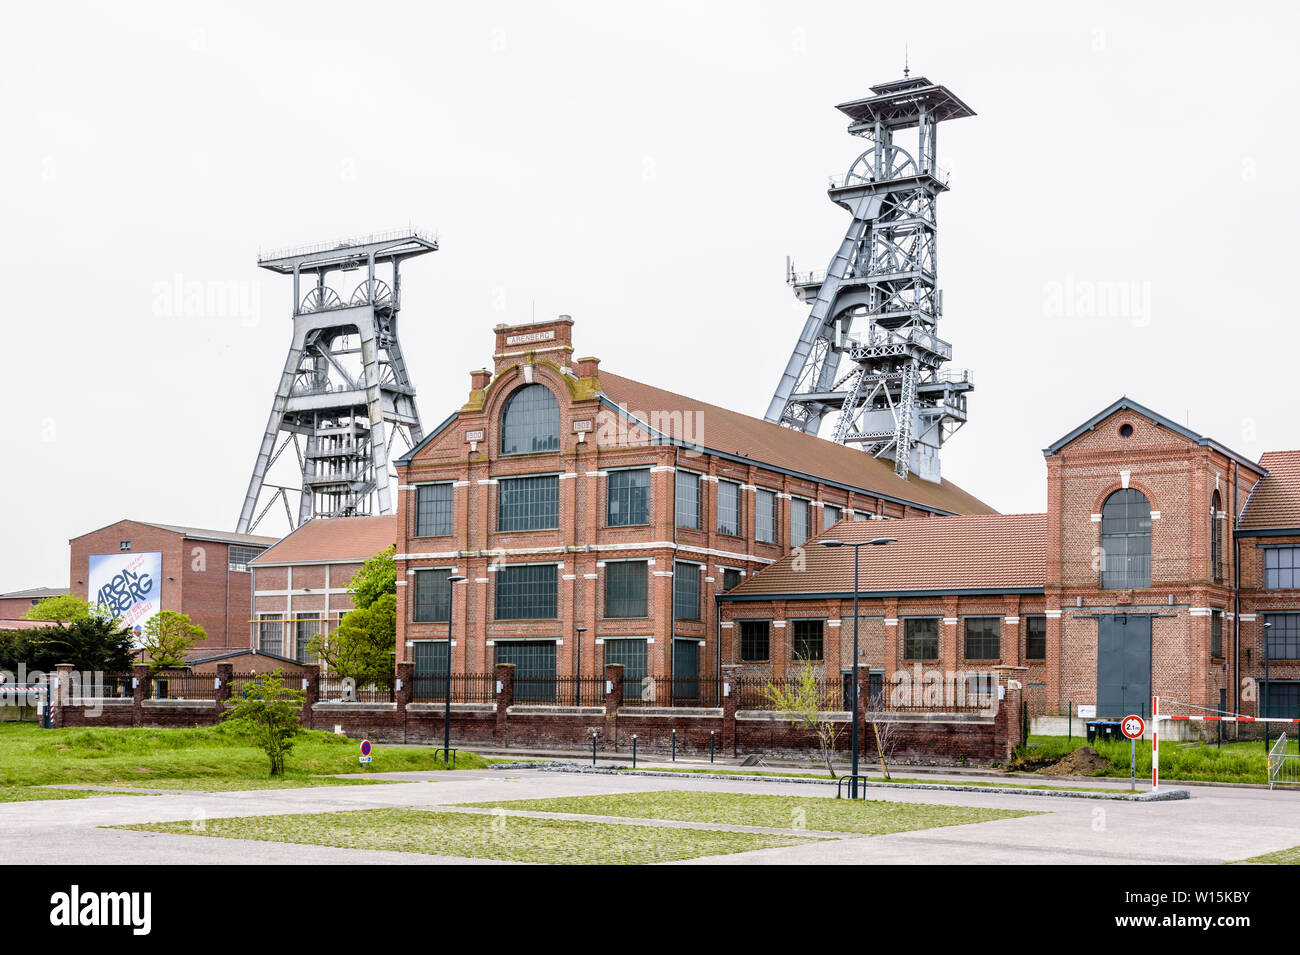 The former Arenberg mine site in Wallers in the mining basin of Nord-Pas de Calais, France, with shaft towers protruding above the brick buildings. Stock Photo